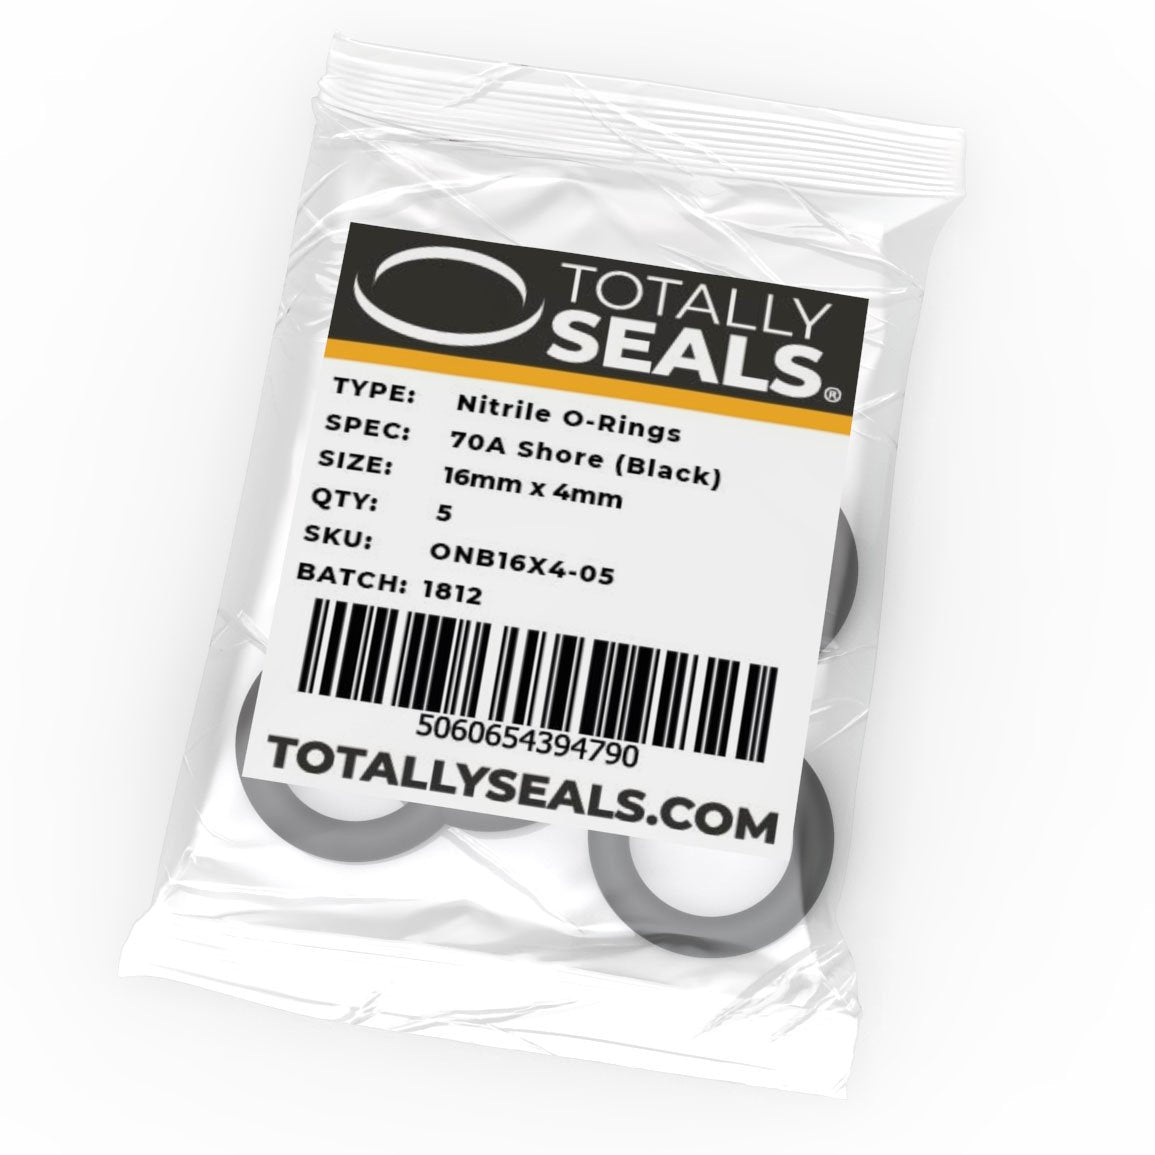 16mm x 4mm (24mm OD) Nitrile O-Rings - Totally Seals®